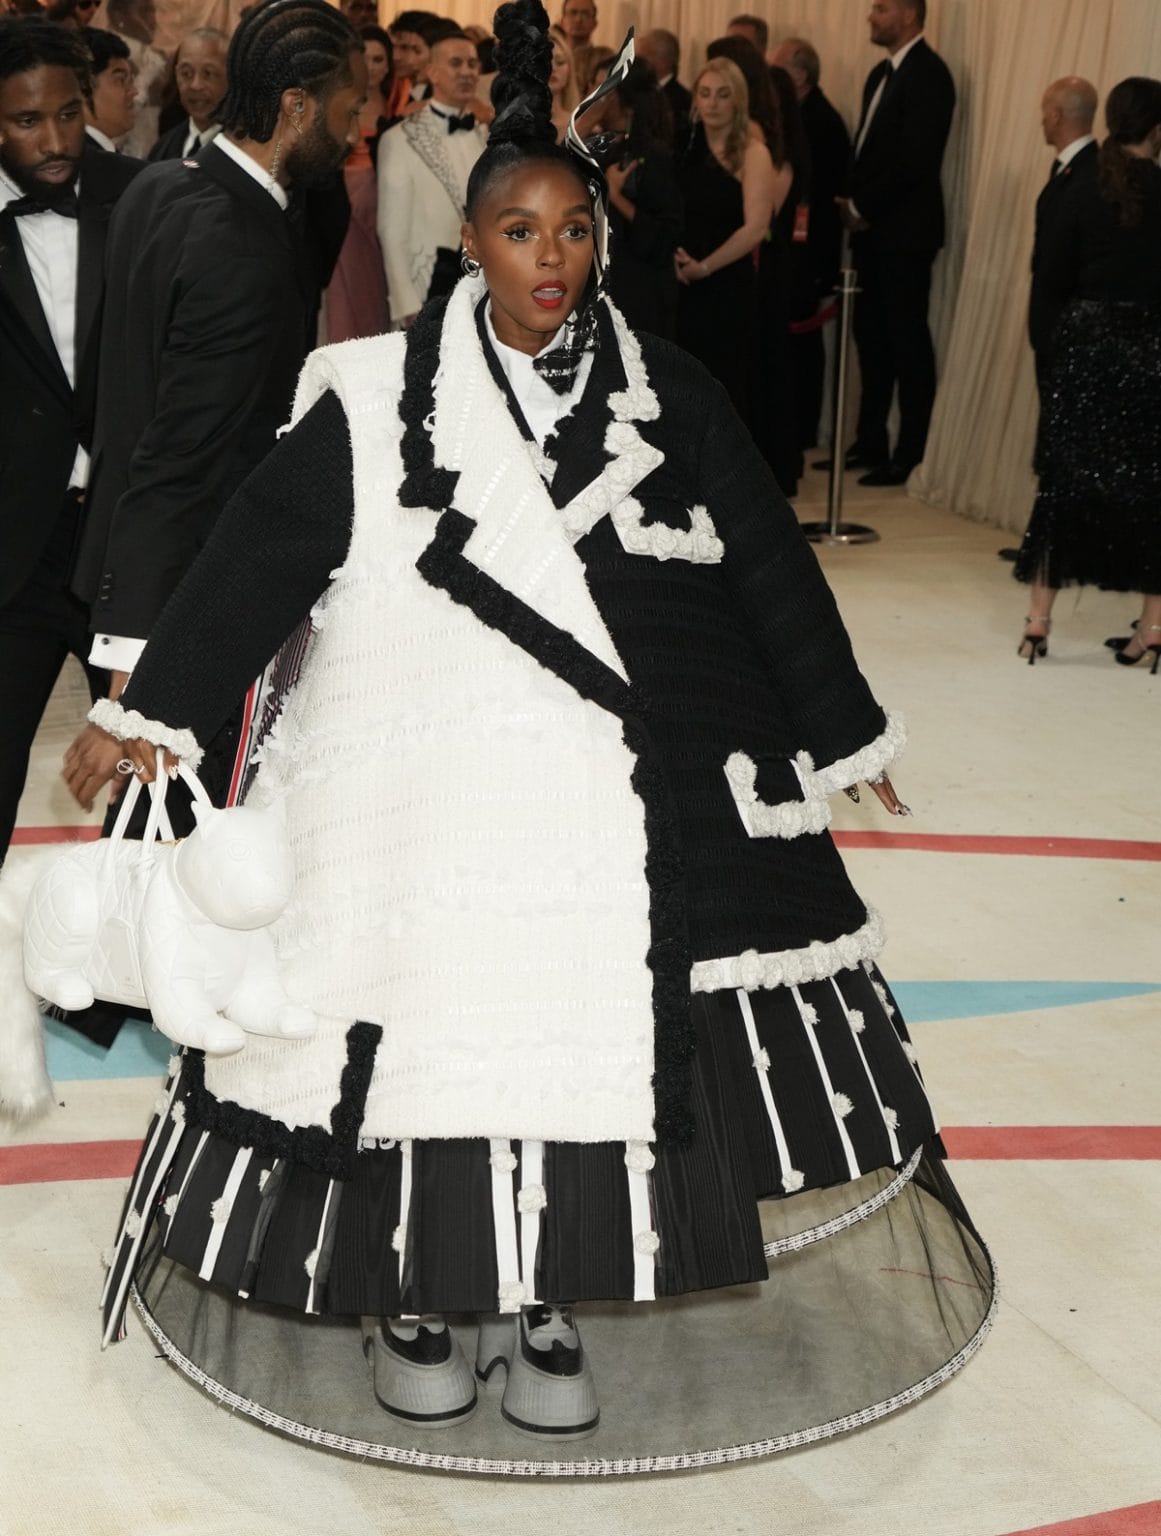 Janelle Monáe Is Much Happier When Her Titties Are Out